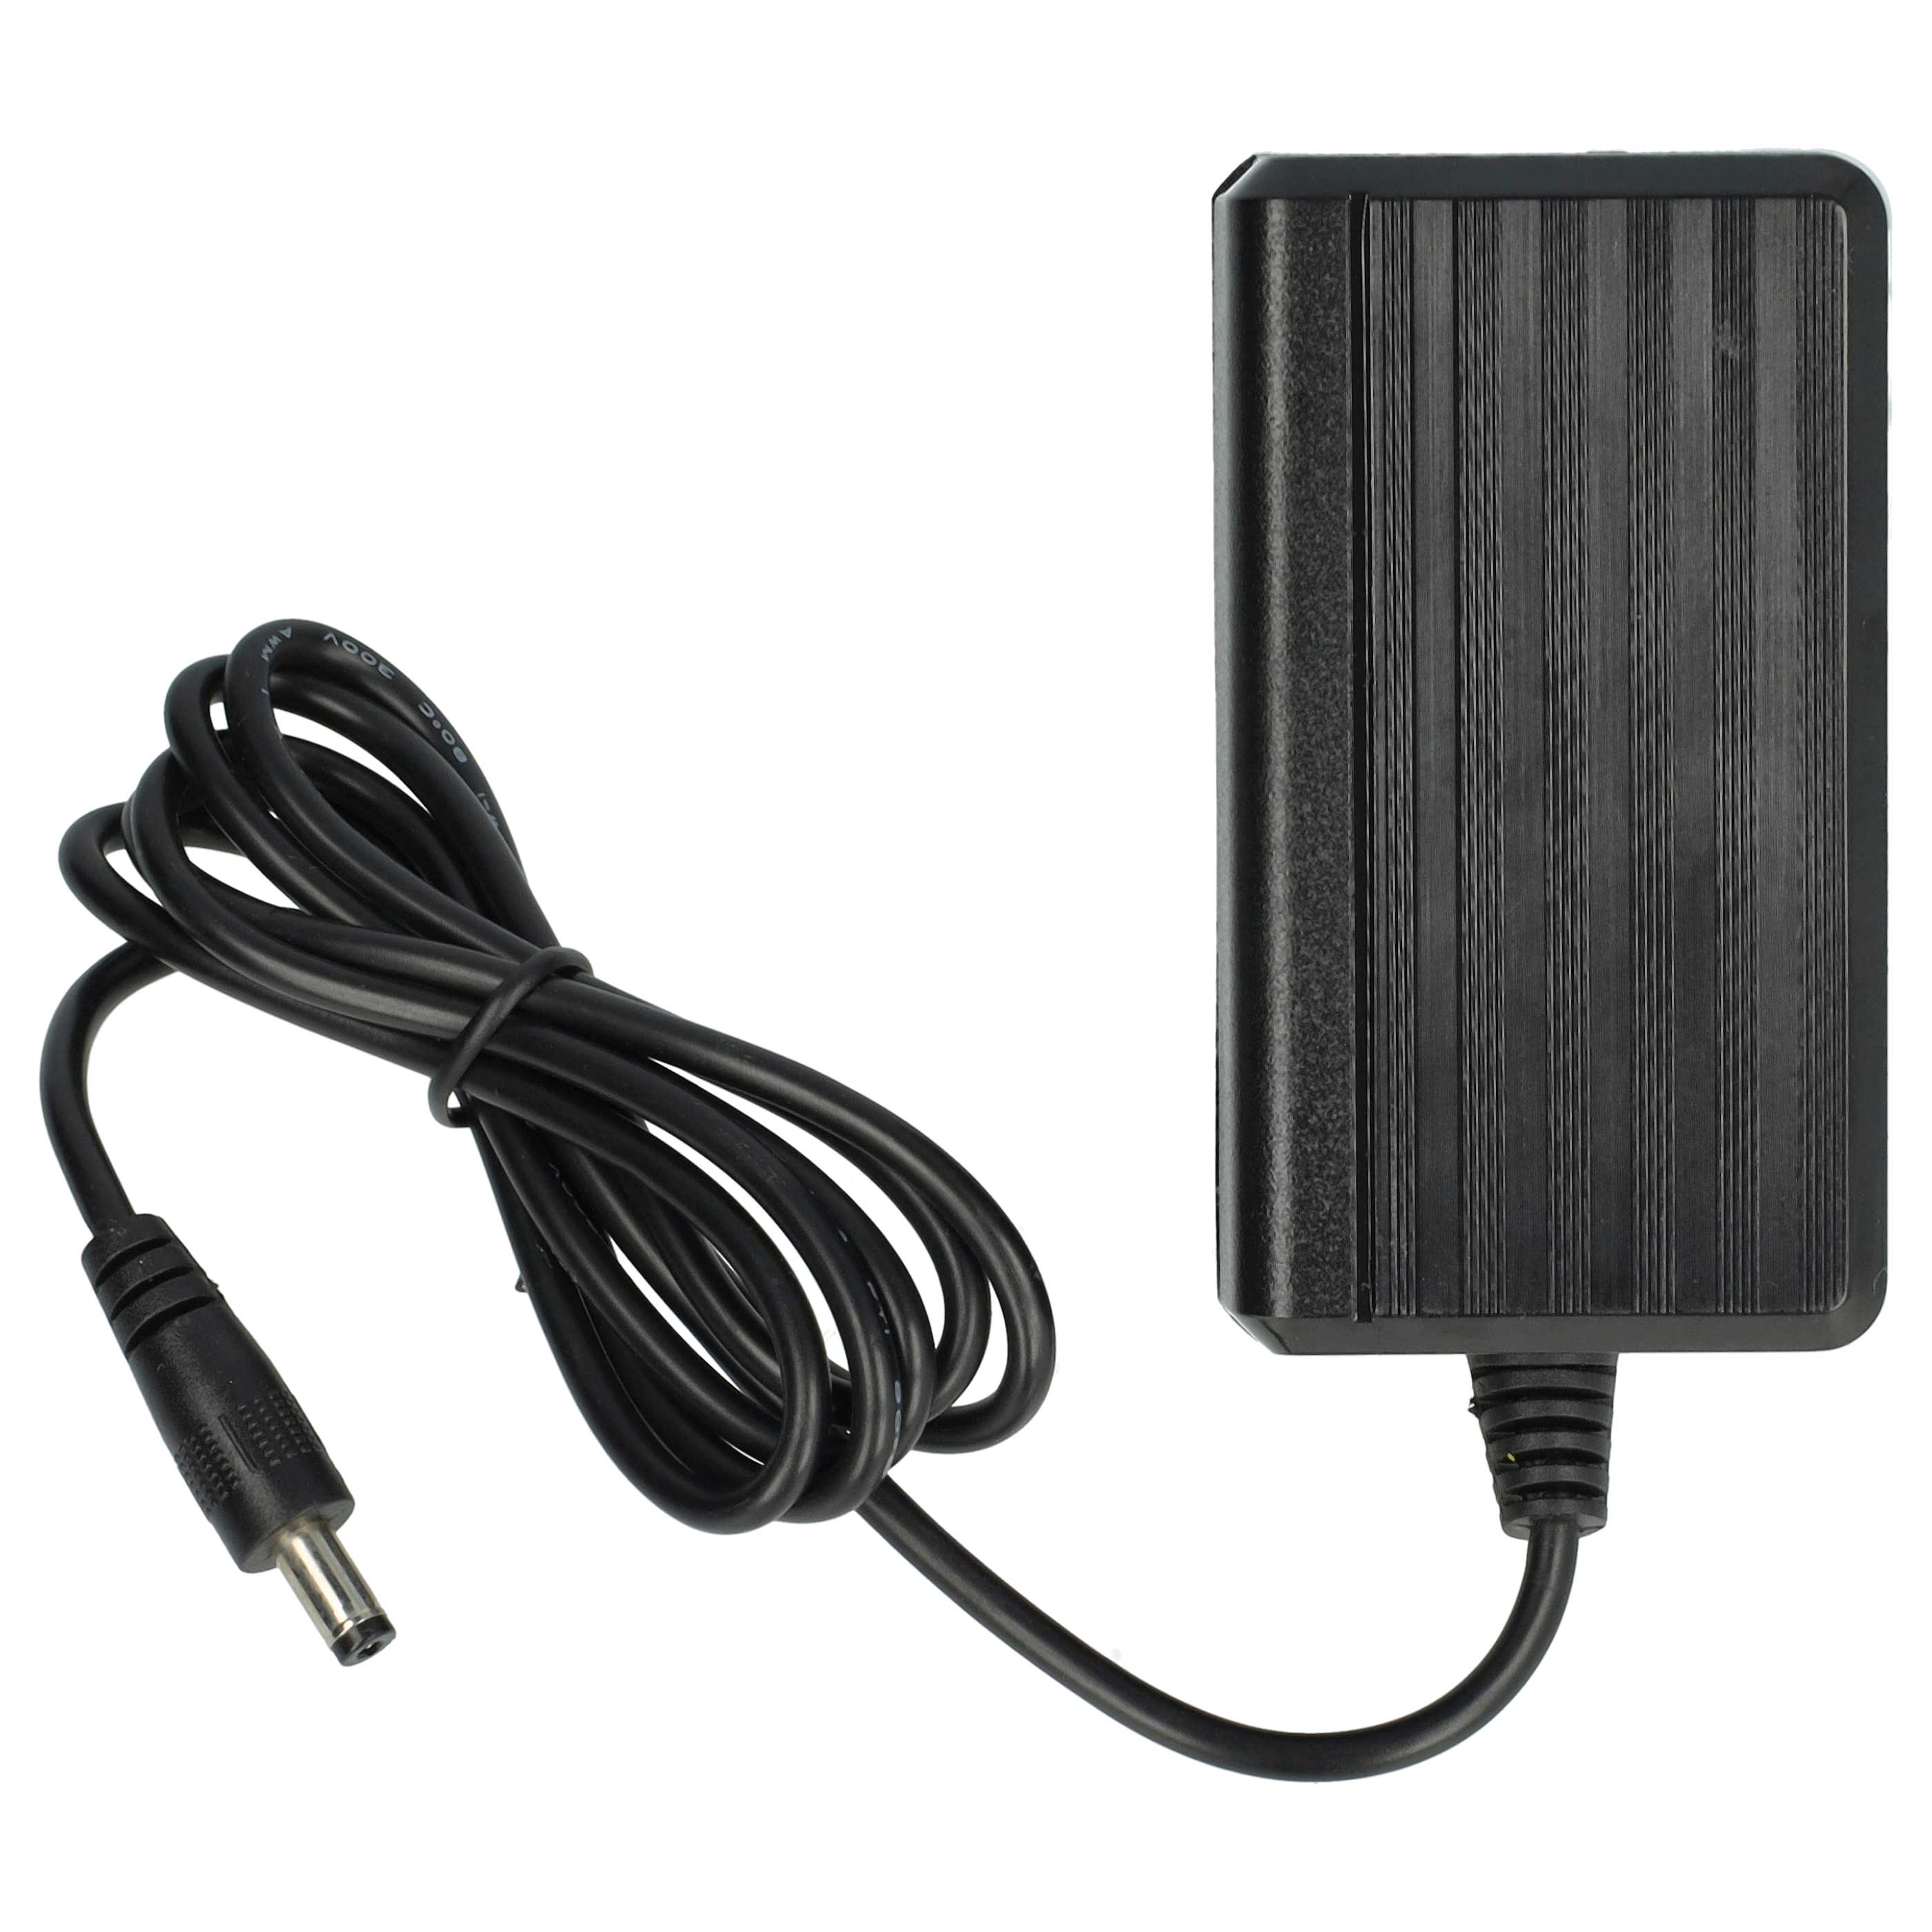 Mains Power Adapter replaces Asus 90-XB0KOAPW00150Q, ADP-36EH C for AsusNotebook, 24 W